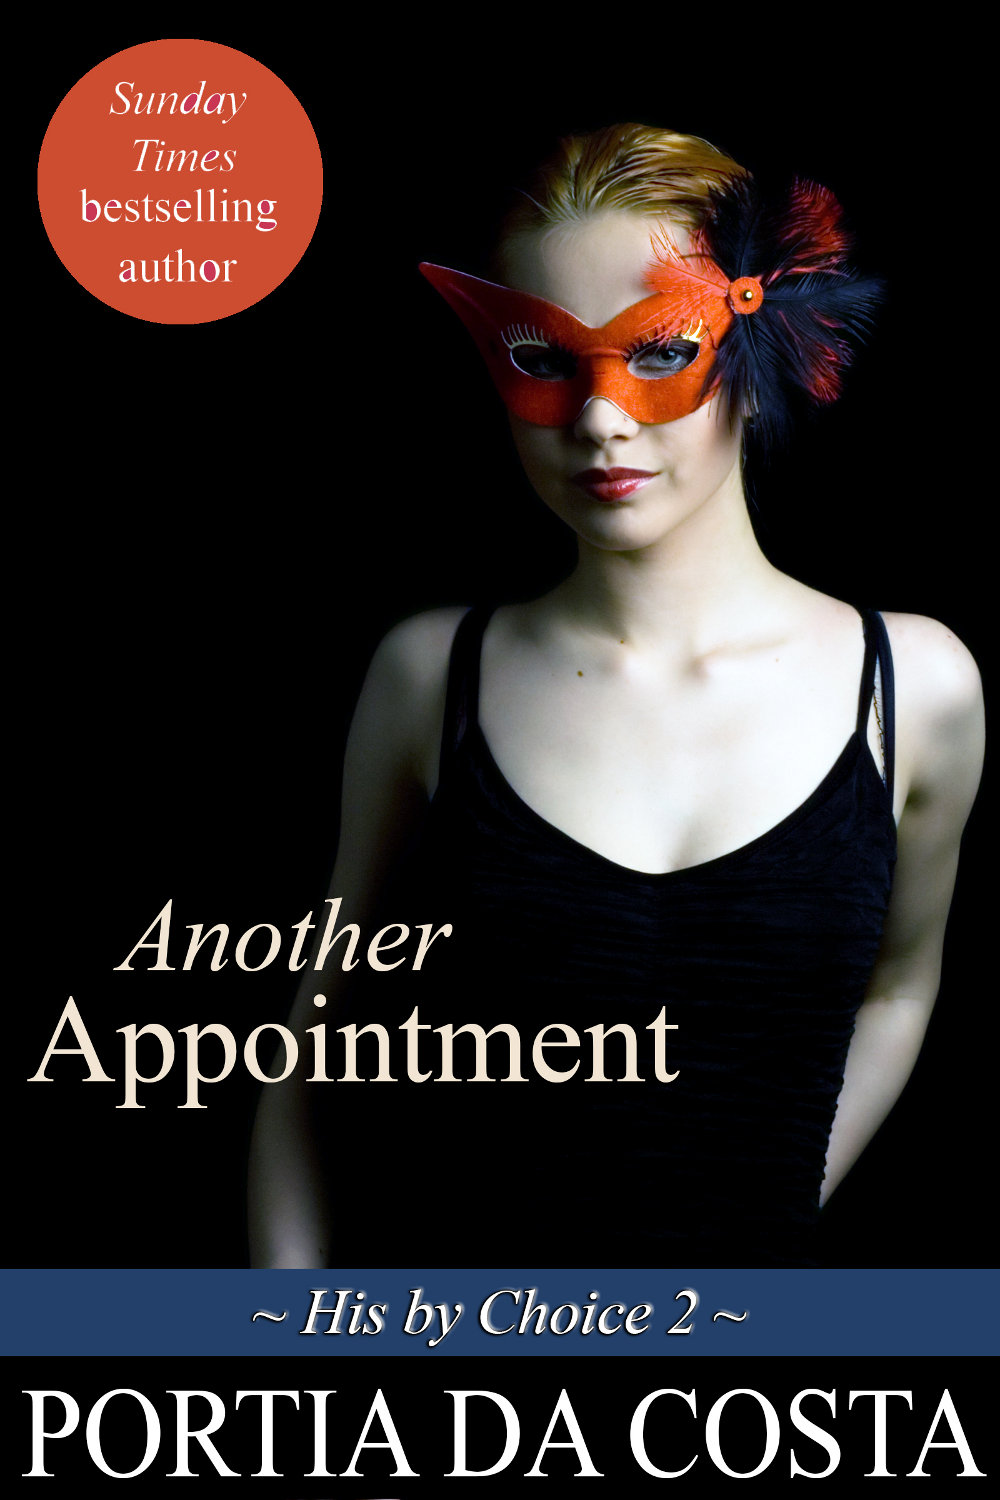 Another Appointment (2014) by Portia Da Costa